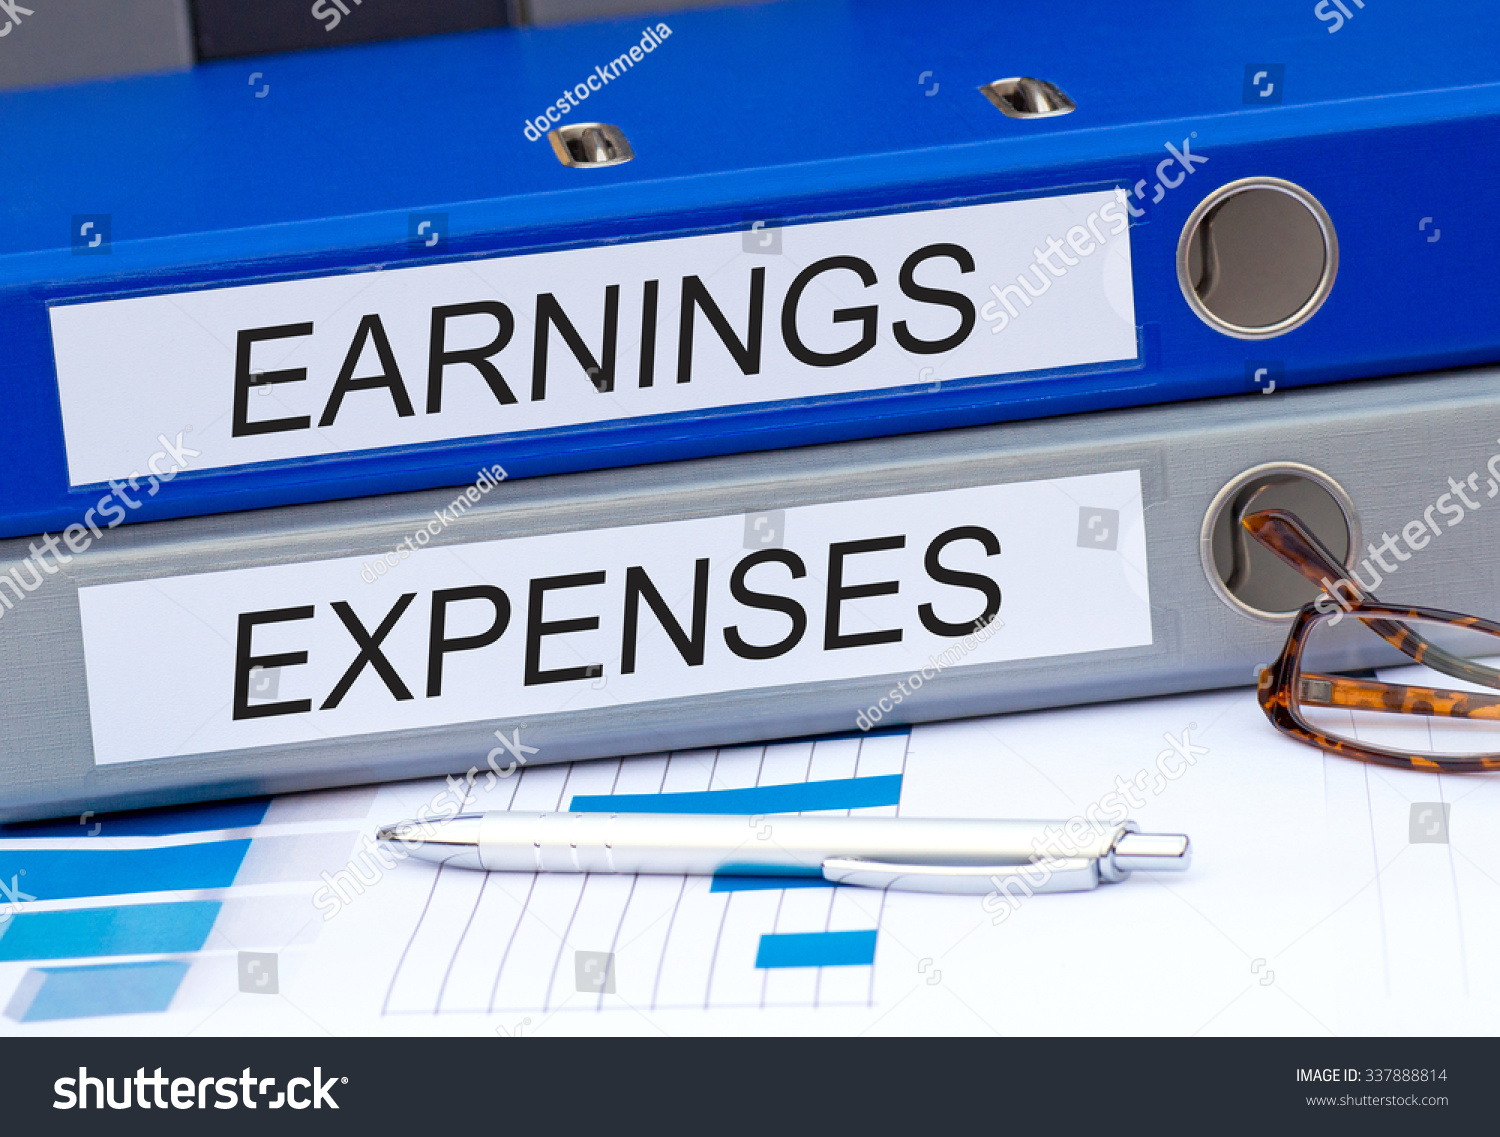 Earnings and Expenses - two binders with text on desk in the office #337888814